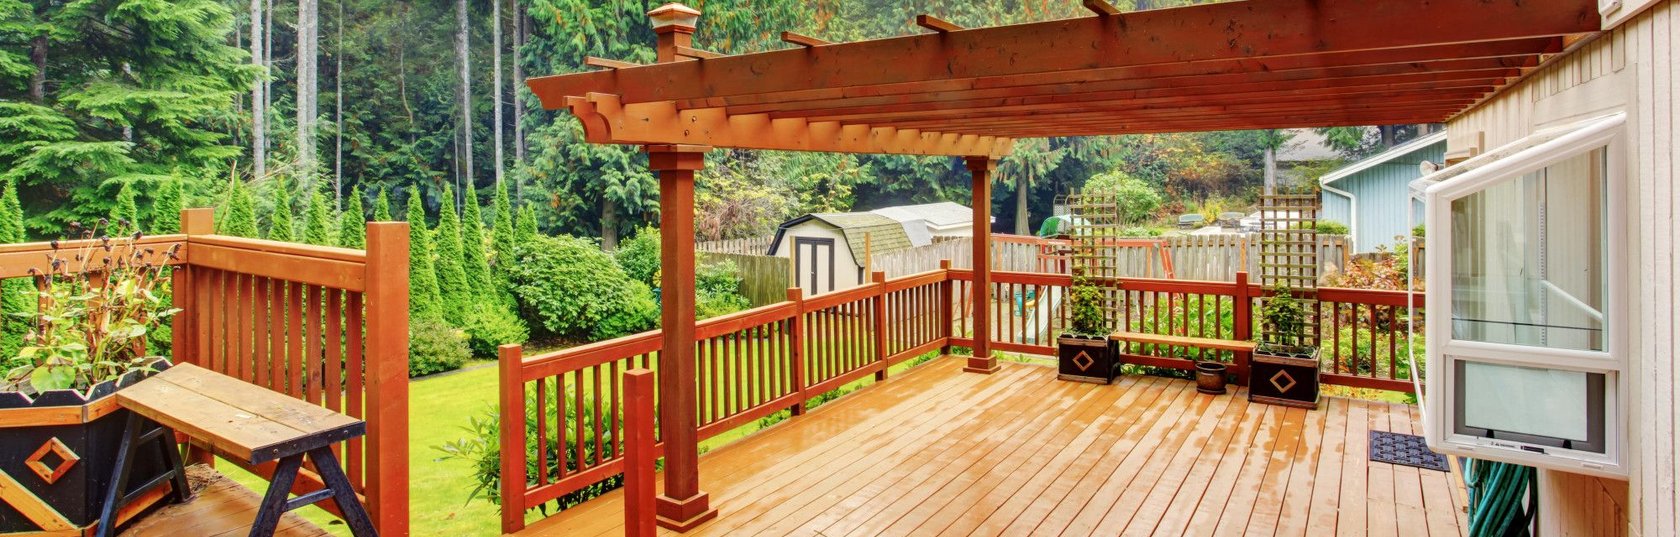 15 timber decking options: which is best for your home?